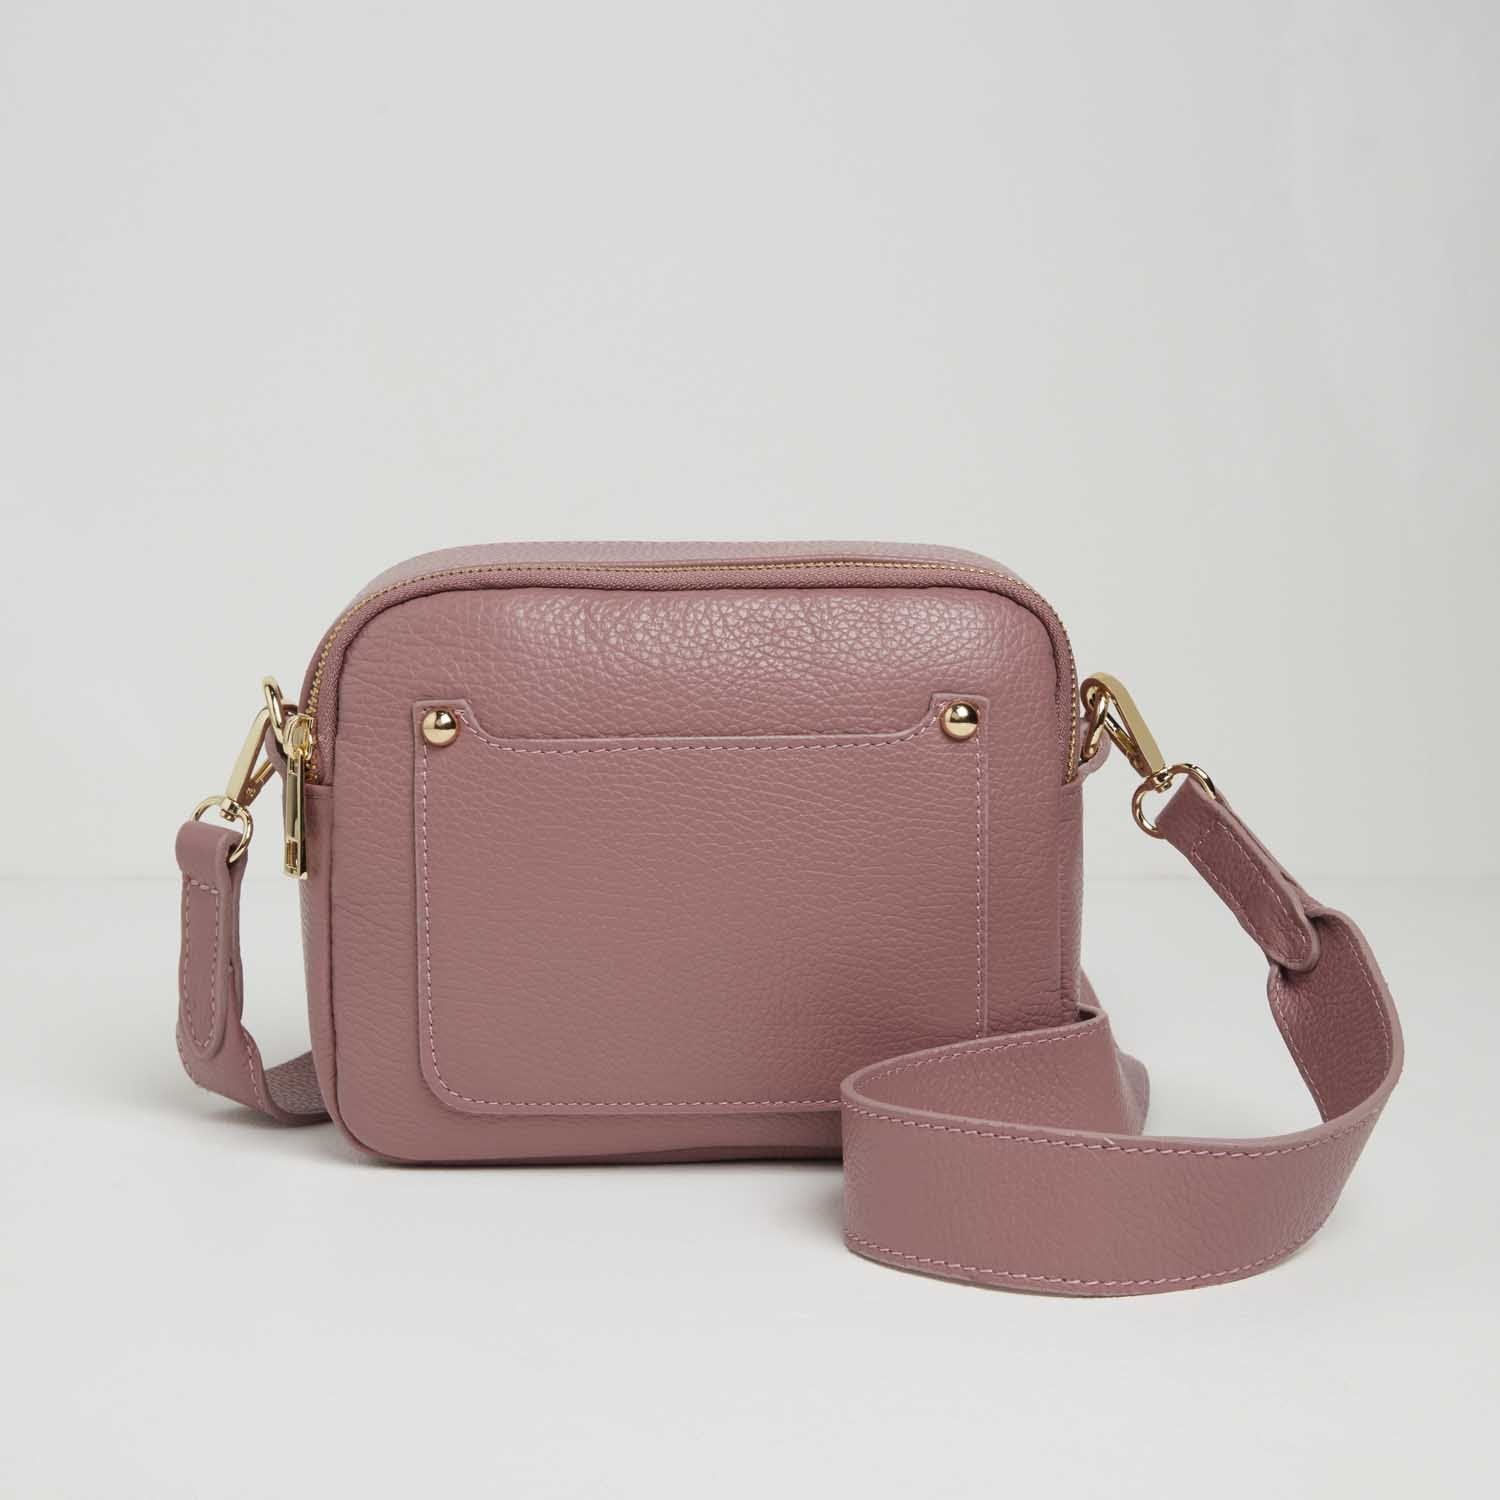 Sienna Crossbody Bag in Blush with Light Pink Leopard Print Strap